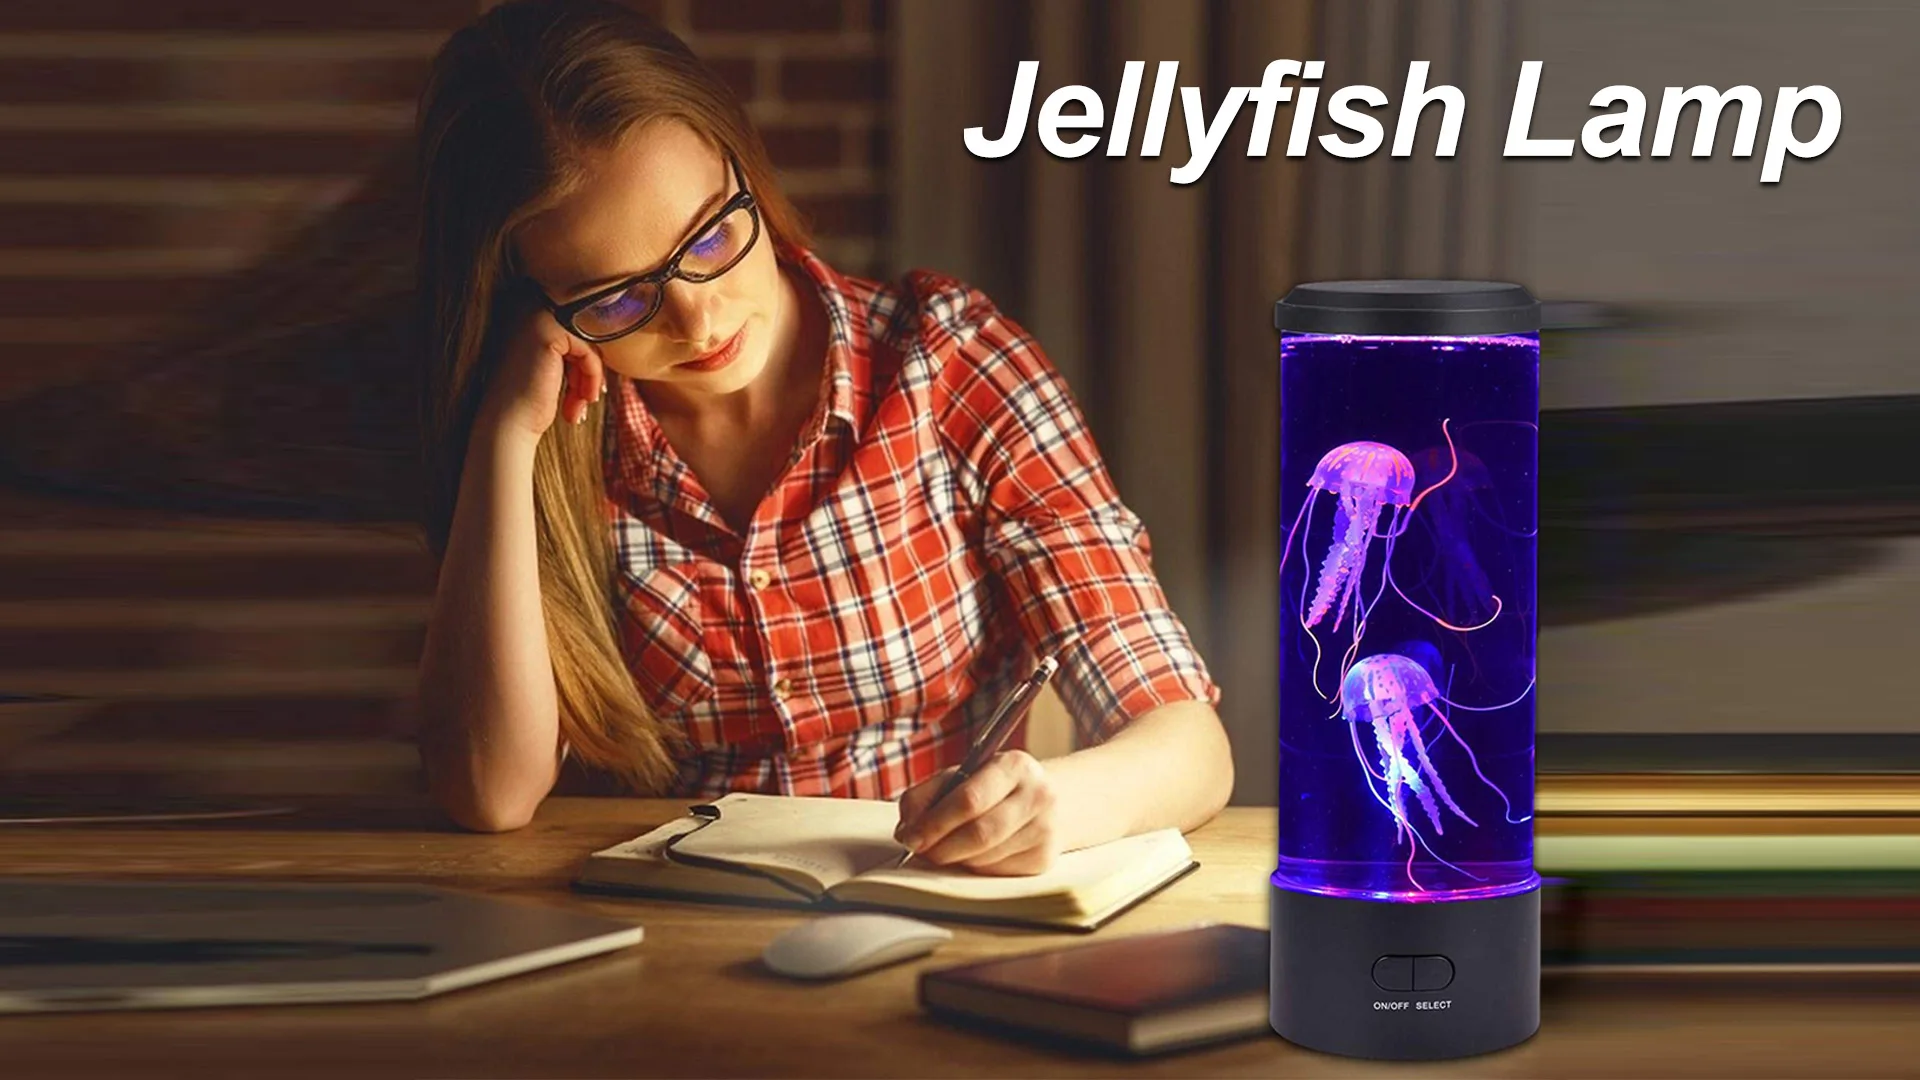 Fantasy Jellyfish Lamp,7 Color Changing Electric Round Jelly Fish Aquarium  Lava Lamp - Buy Jellyfish Lamp,Jellyfish Lava Lamp,Jellyfish Aquarium Lamp  Product on Alibaba.com